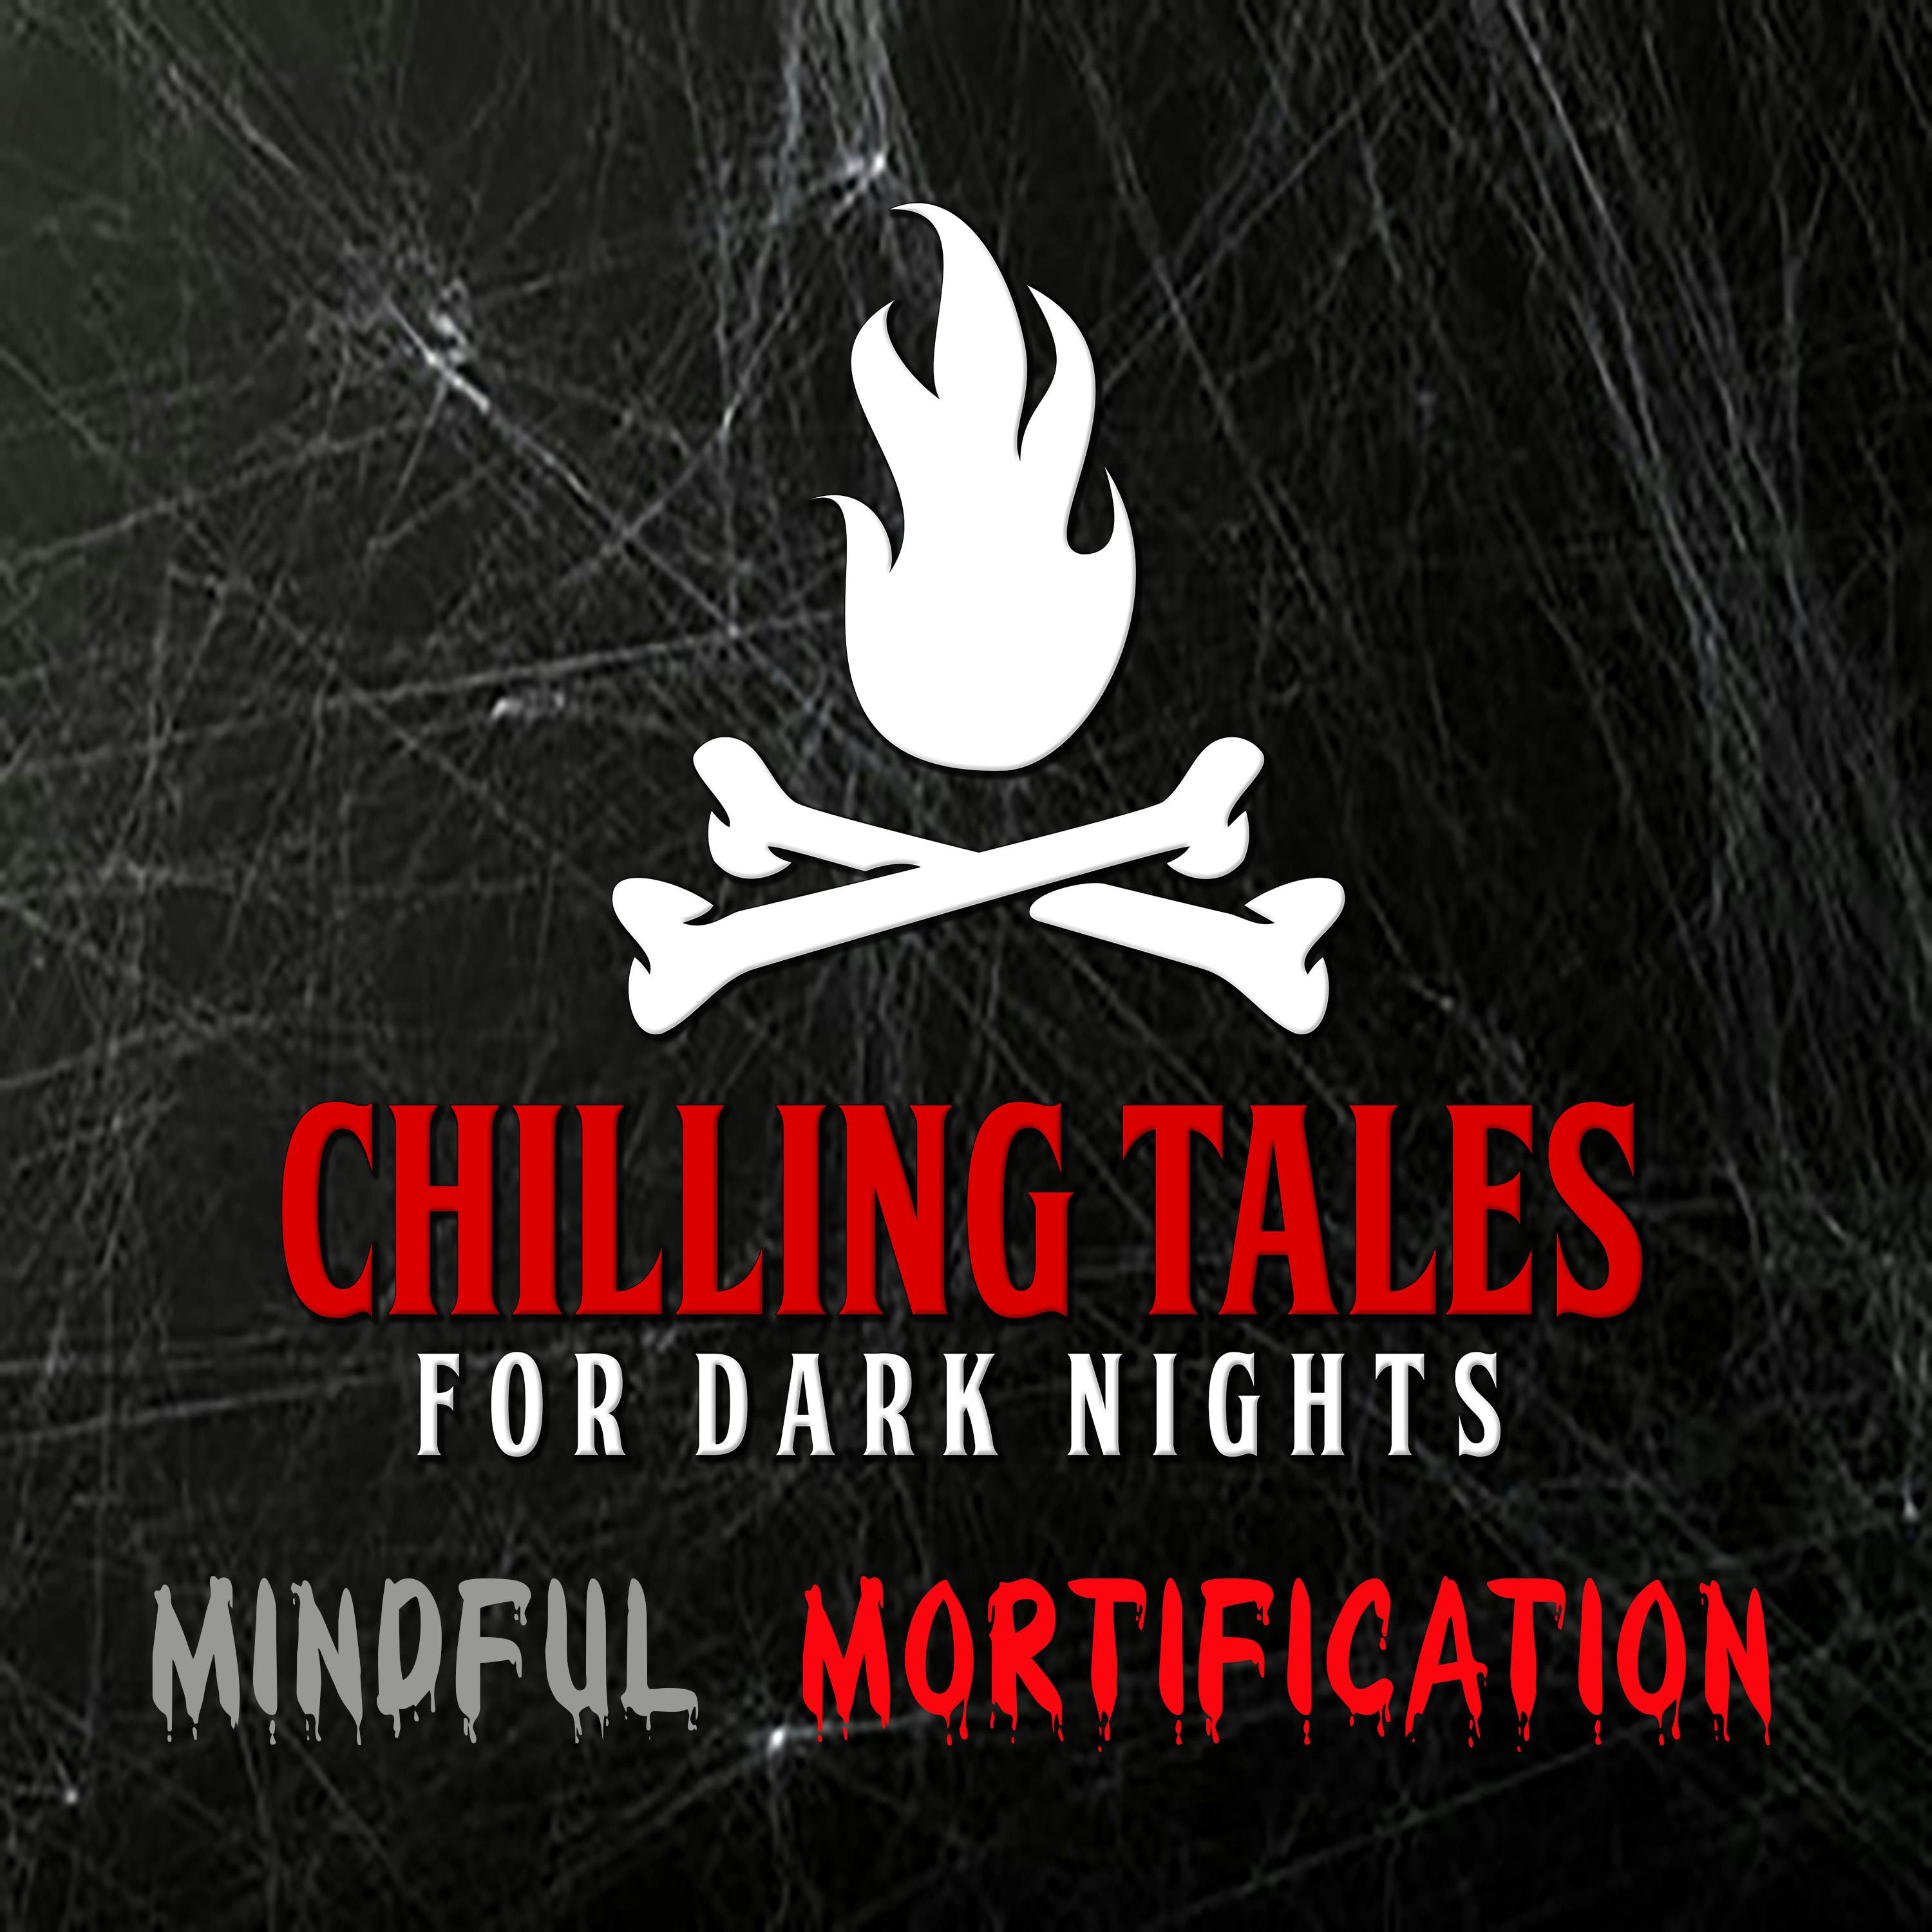 186: Mindful Mortification - Chilling Tales for Dark Nights